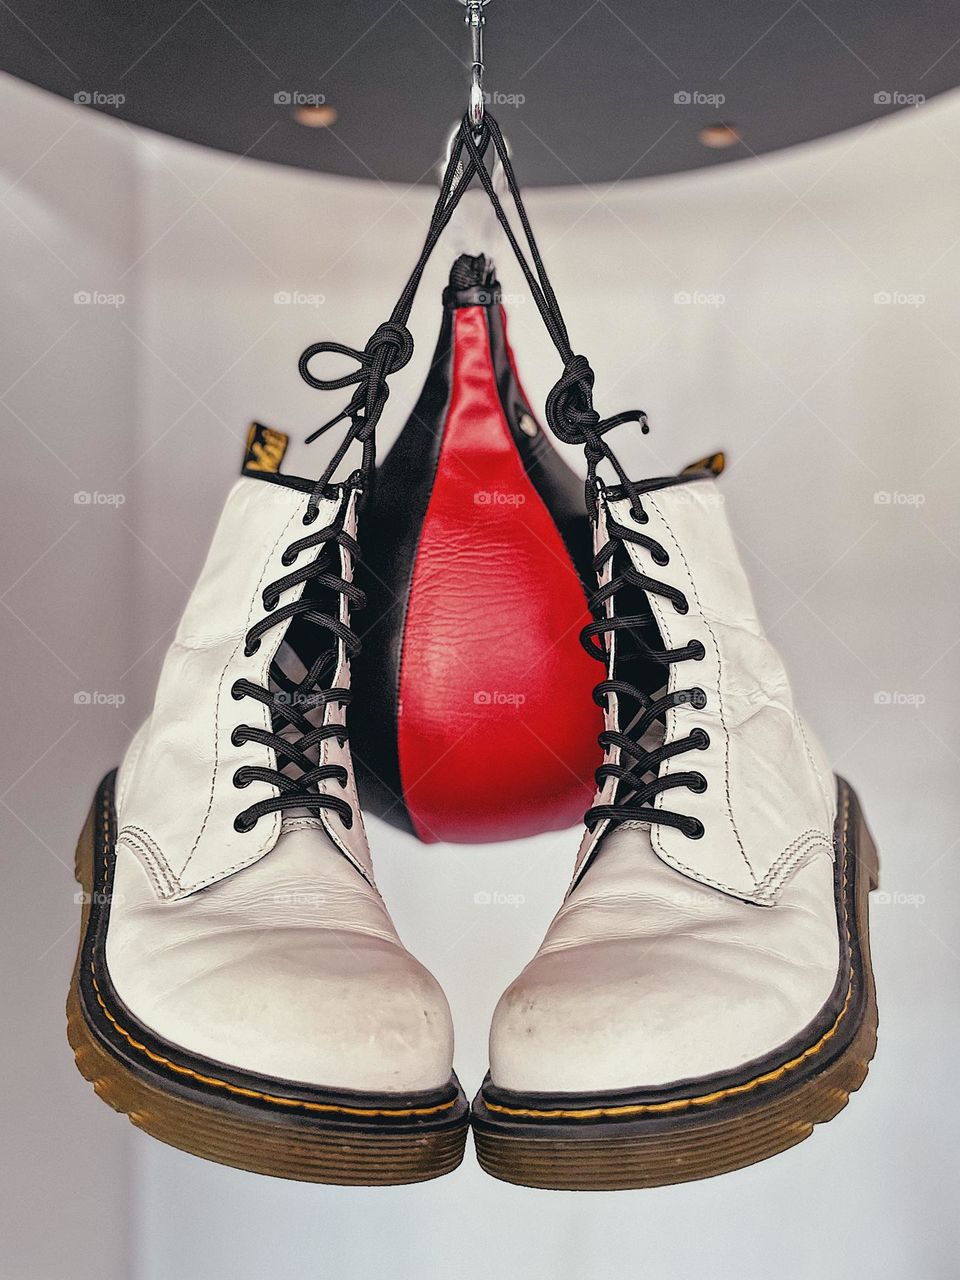 Classic white Doc Marten boots hanging from a speed bag, white boots with speed punching bag, Doc Marten white boots, classic style never goes out of style, boxing and boots, bright white boots 